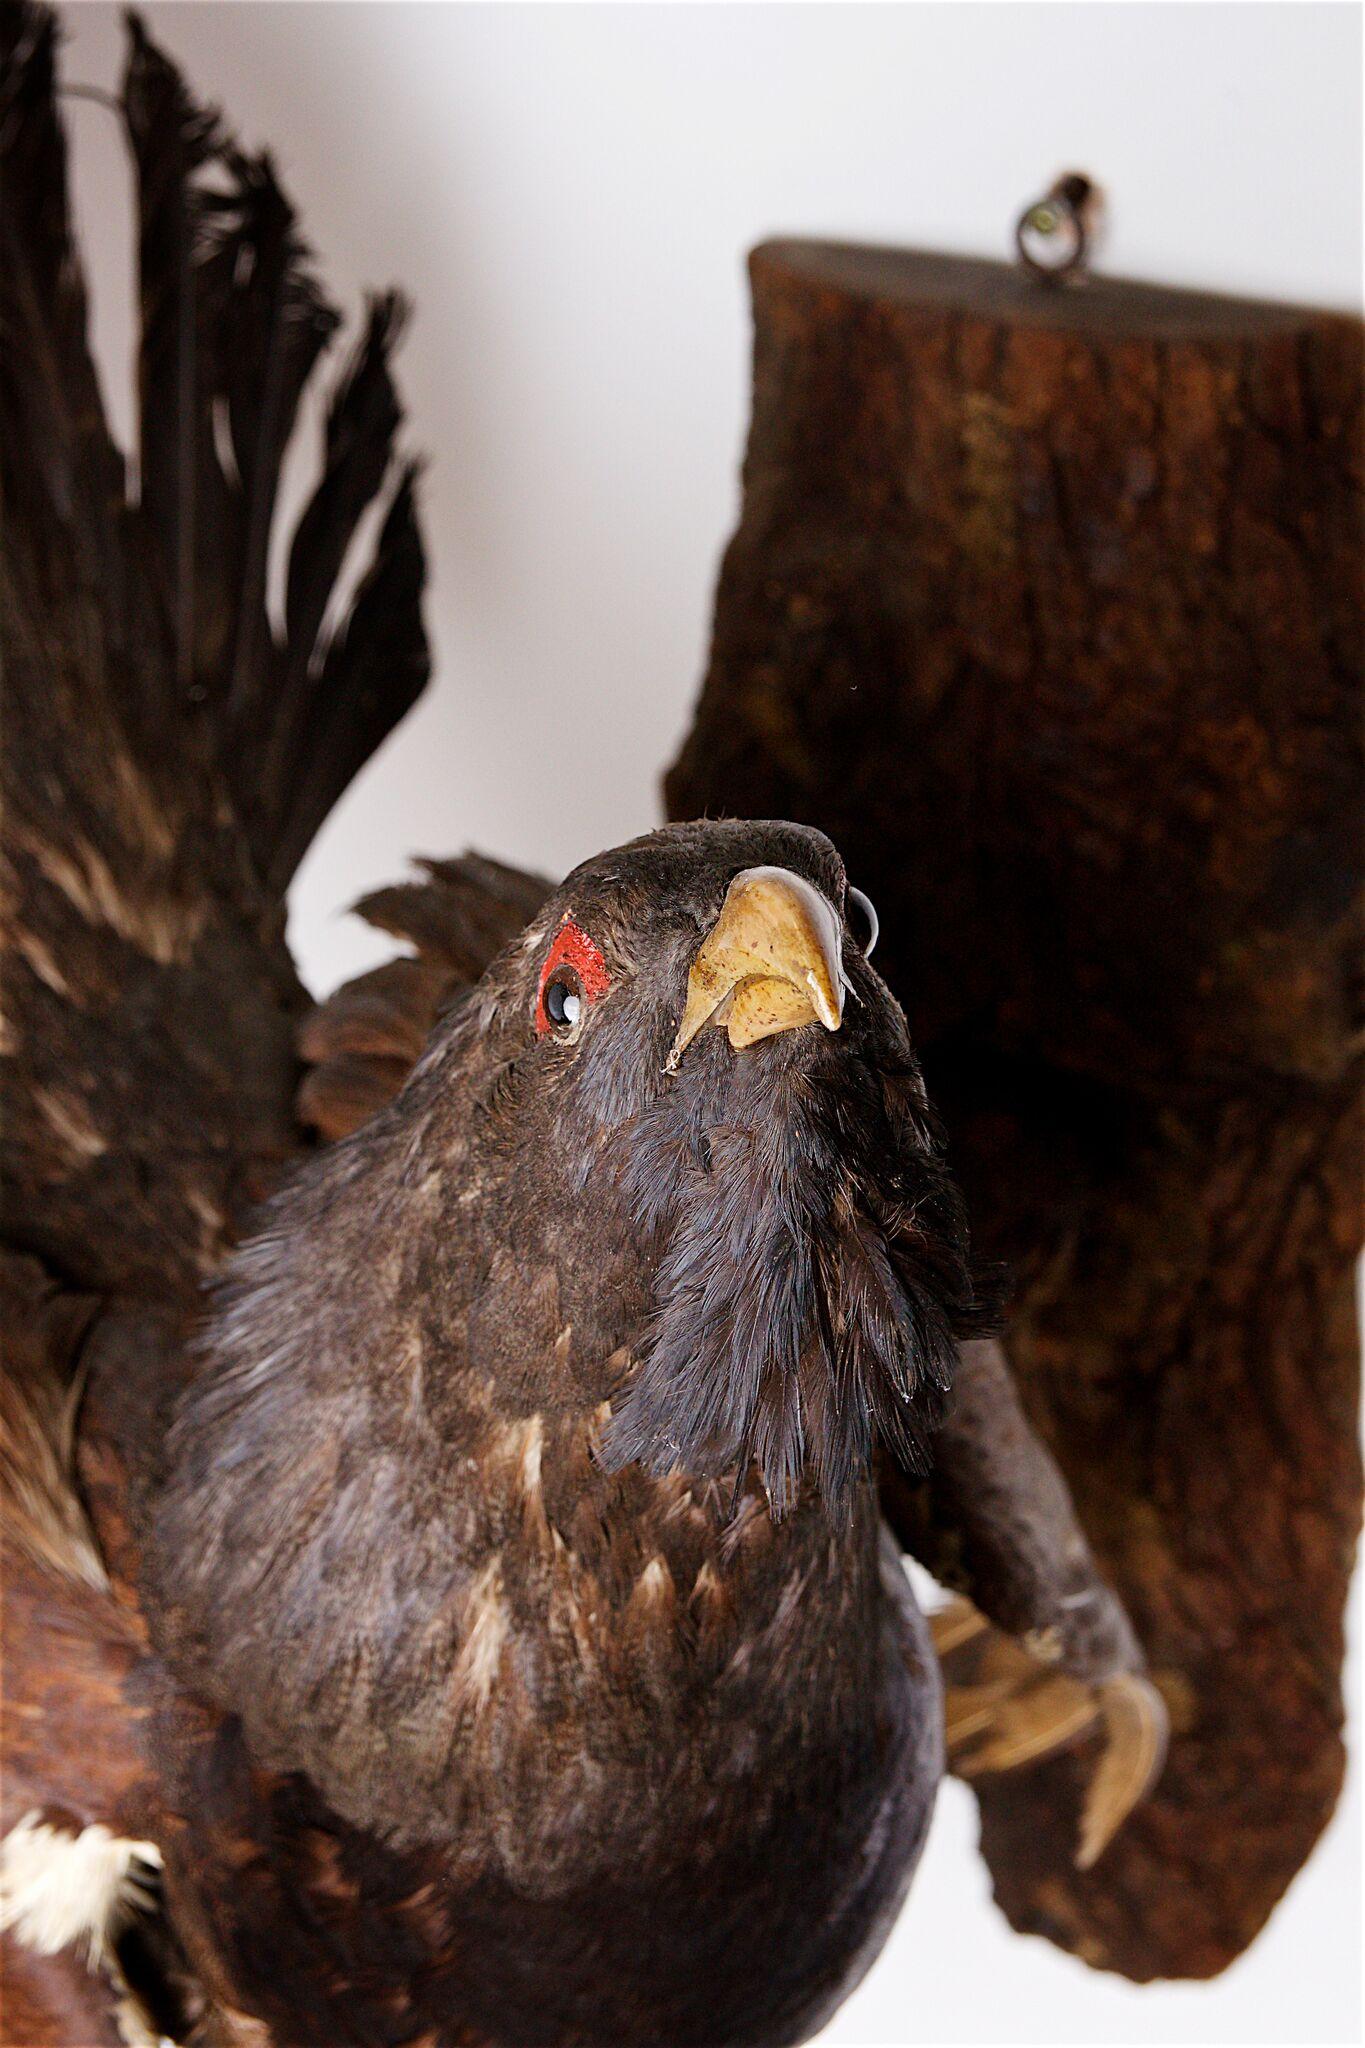 Scottish Capercaillie, Open Mouthed, Perched Upon a Branch